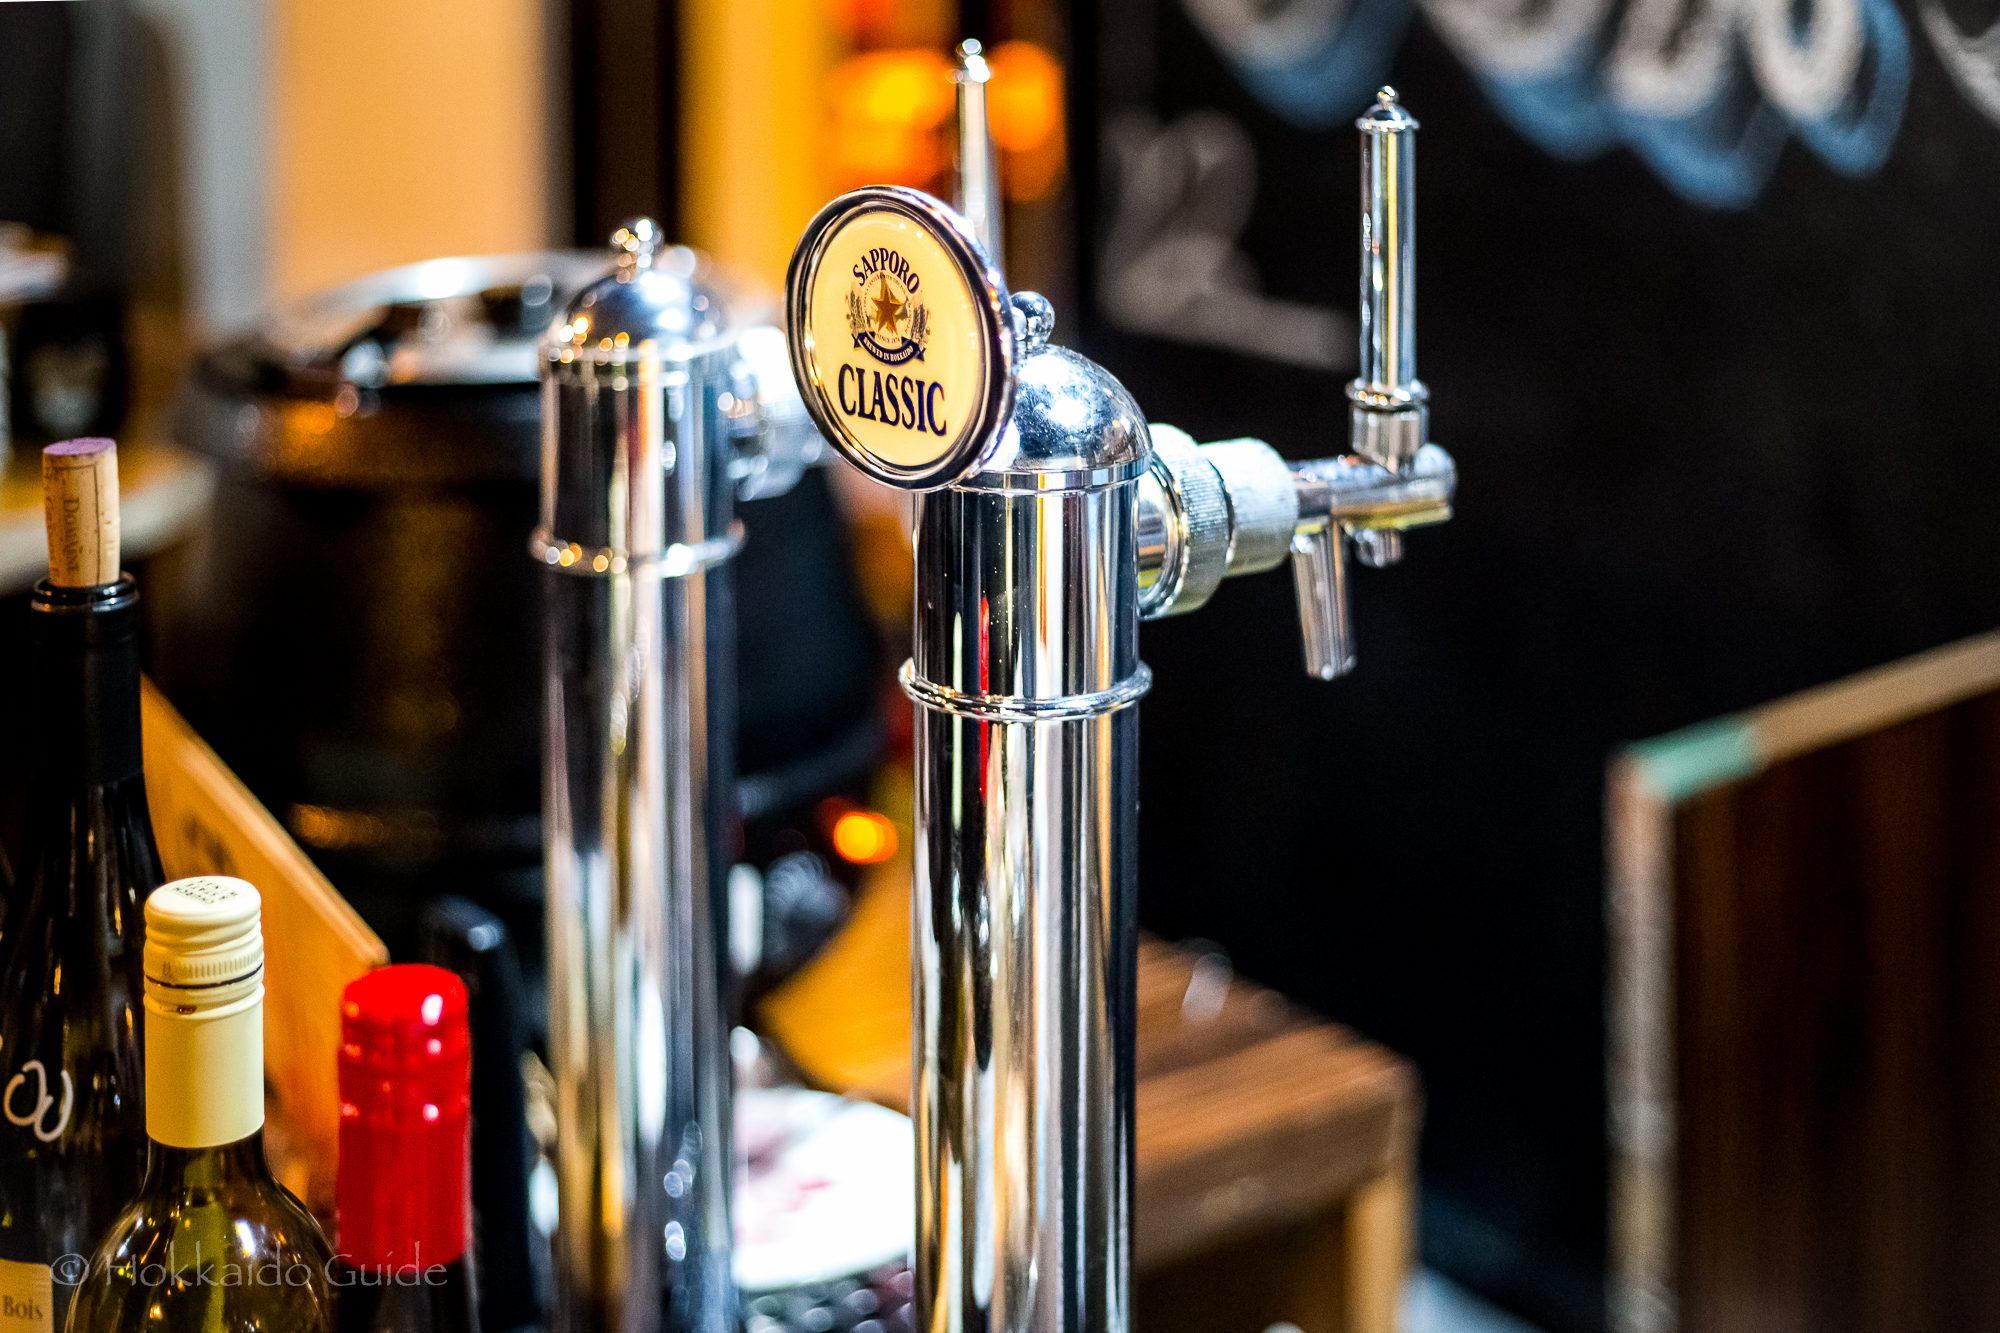 Mick's Bar beer on tap